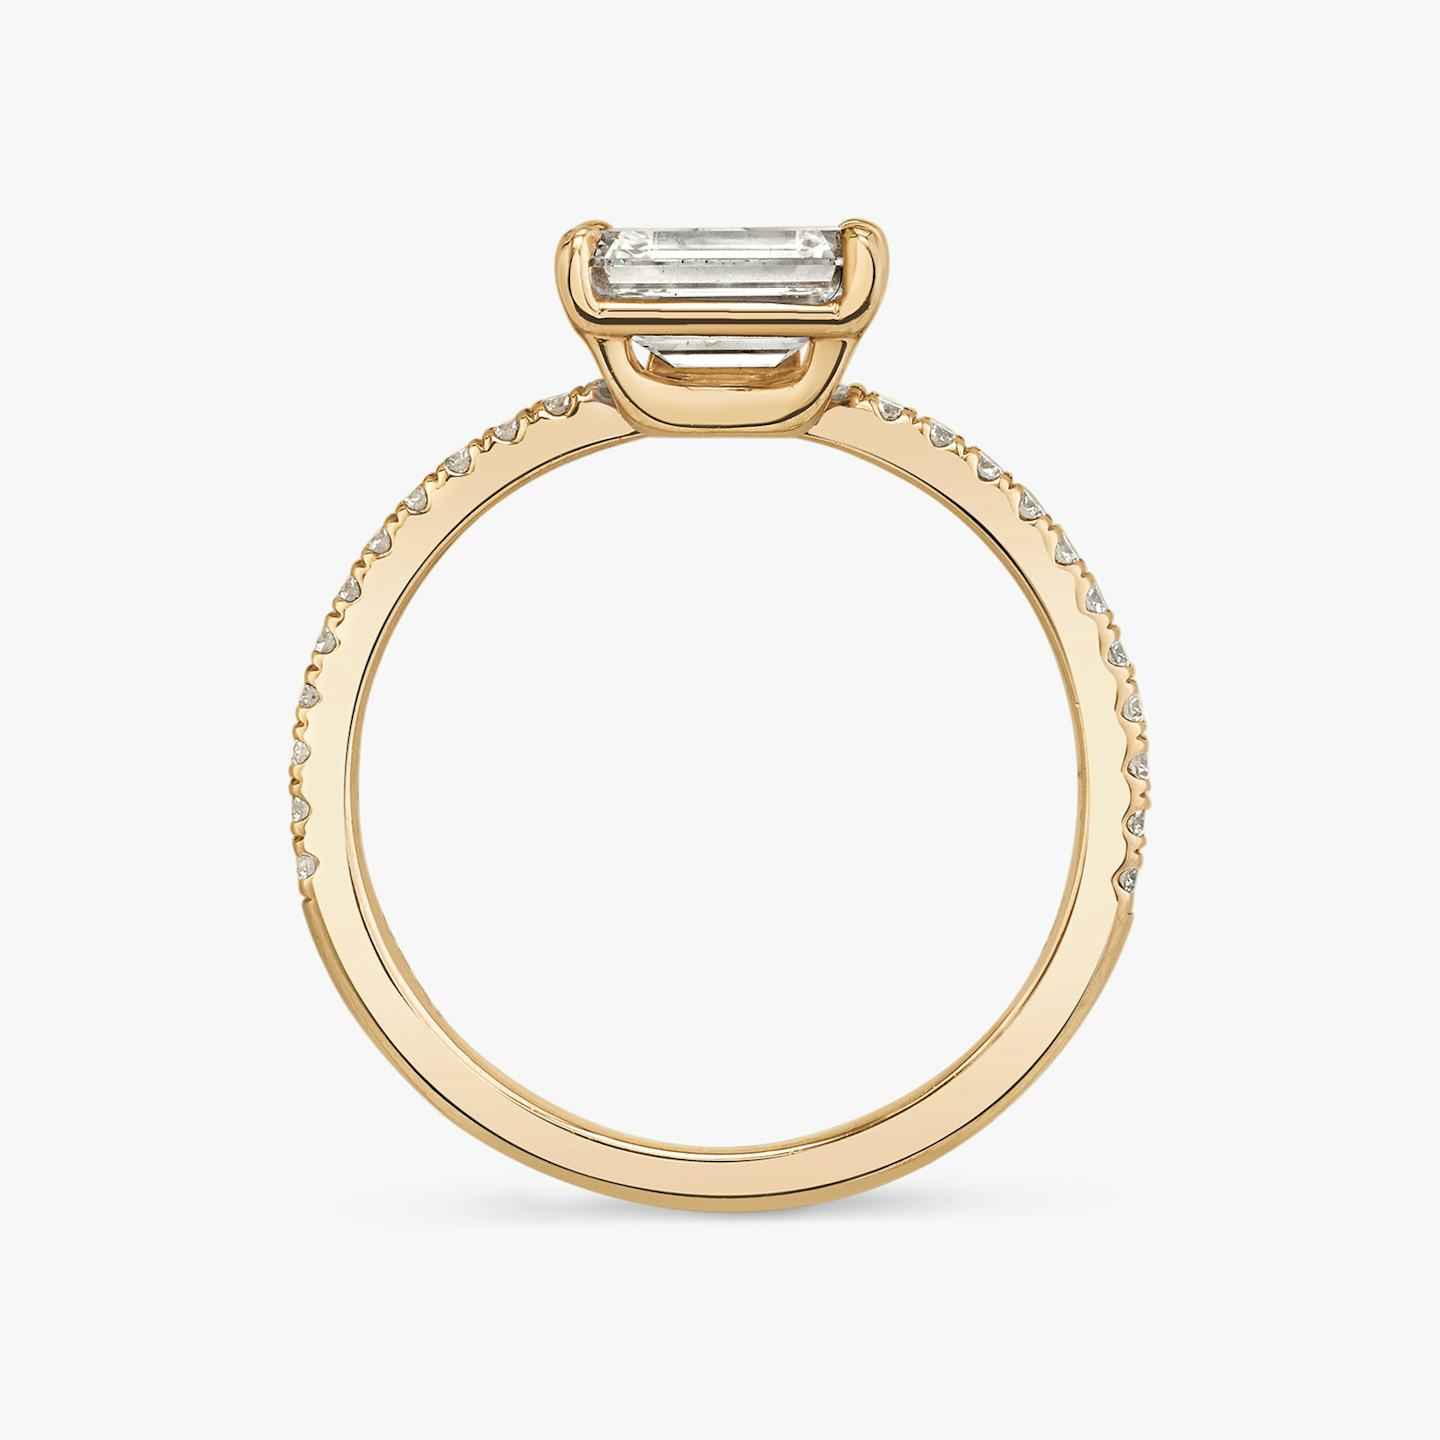 The Hover | Emerald | 14k | 14k Rose Gold | Band: Pavé | Diamond orientation: vertical | Carat weight: See full inventory